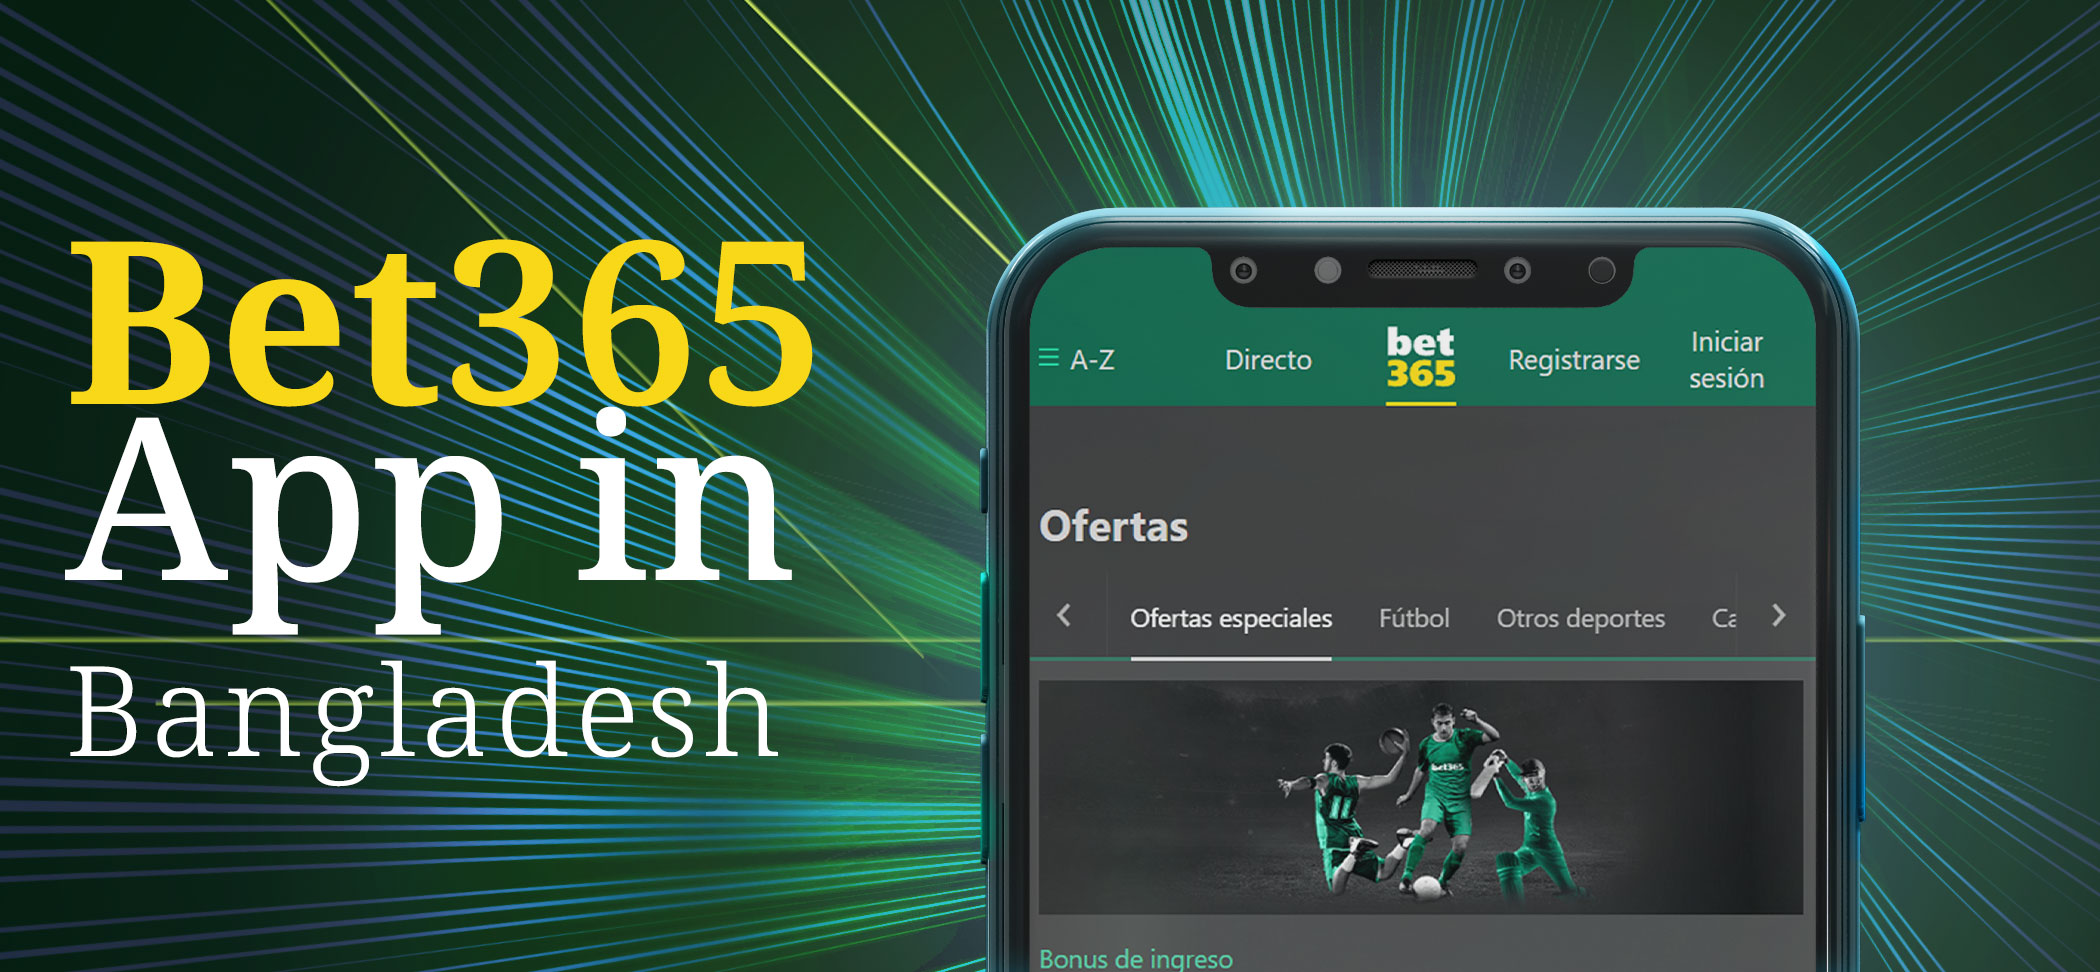 The most useful information about the bet365 app.